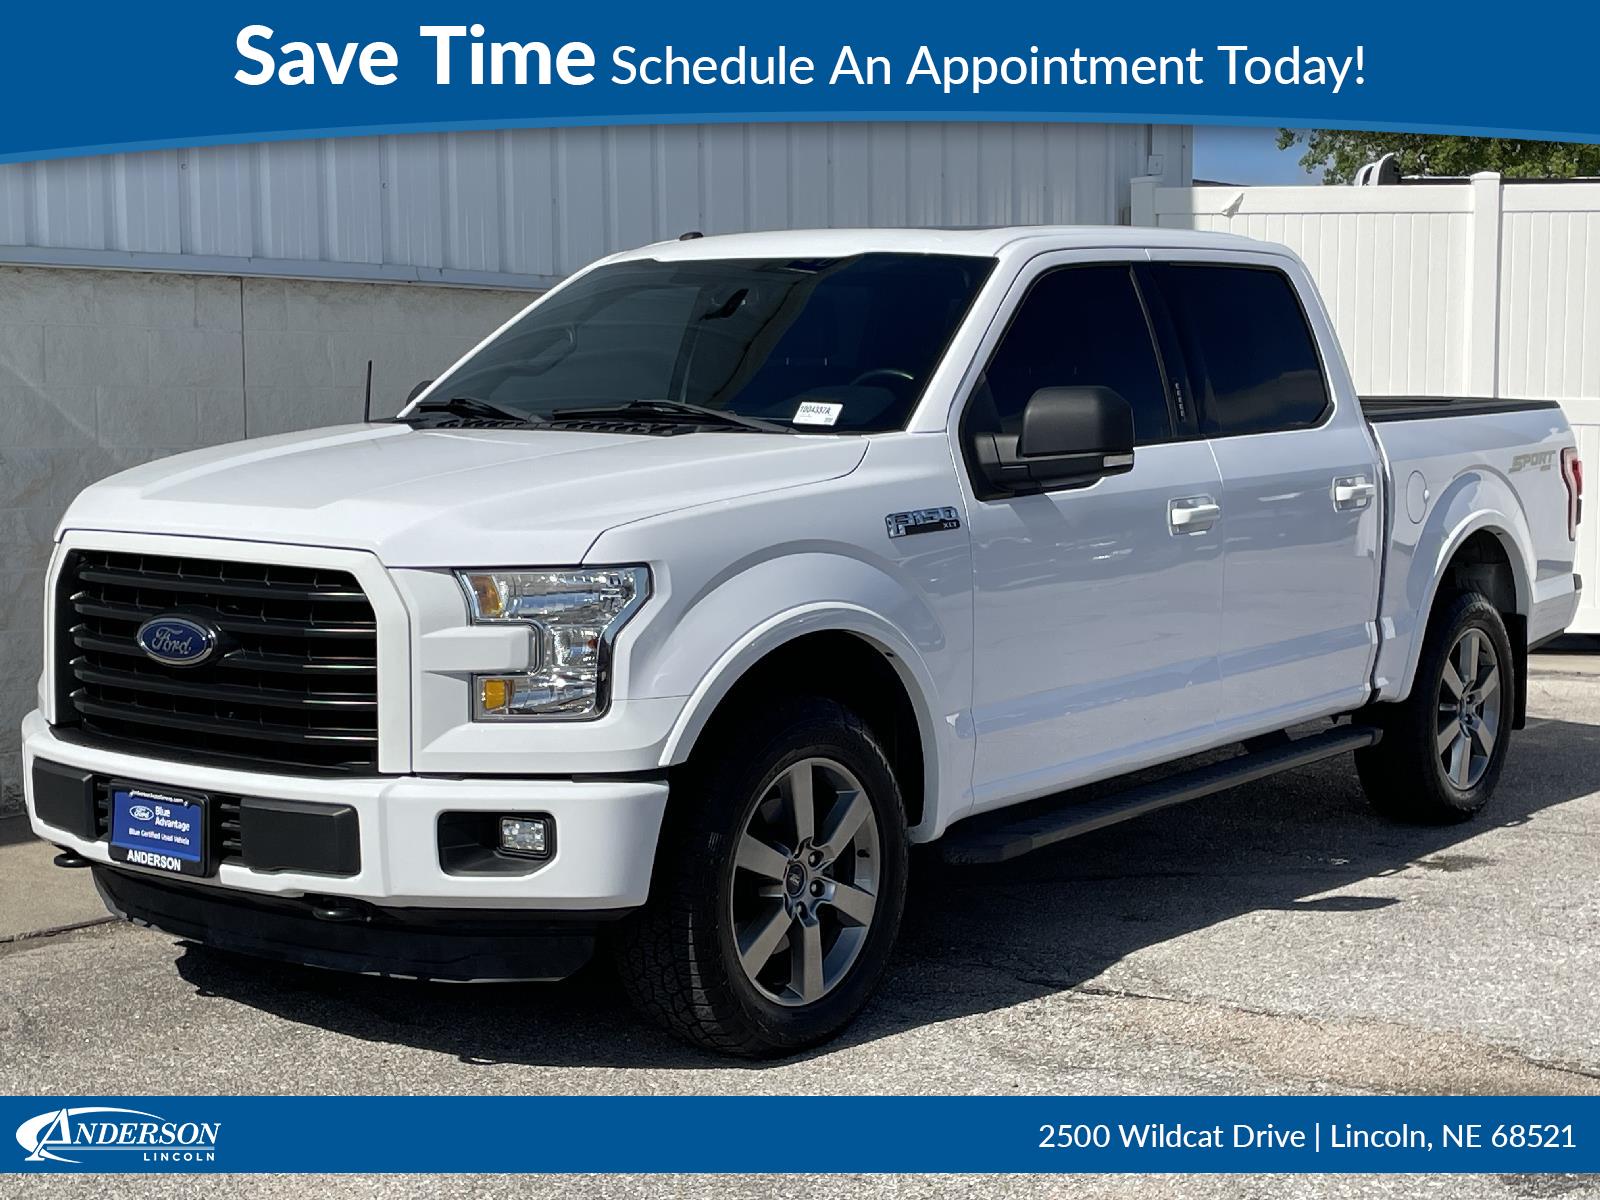 Used 2016 Ford F-150 XLT Stock: 1004337A